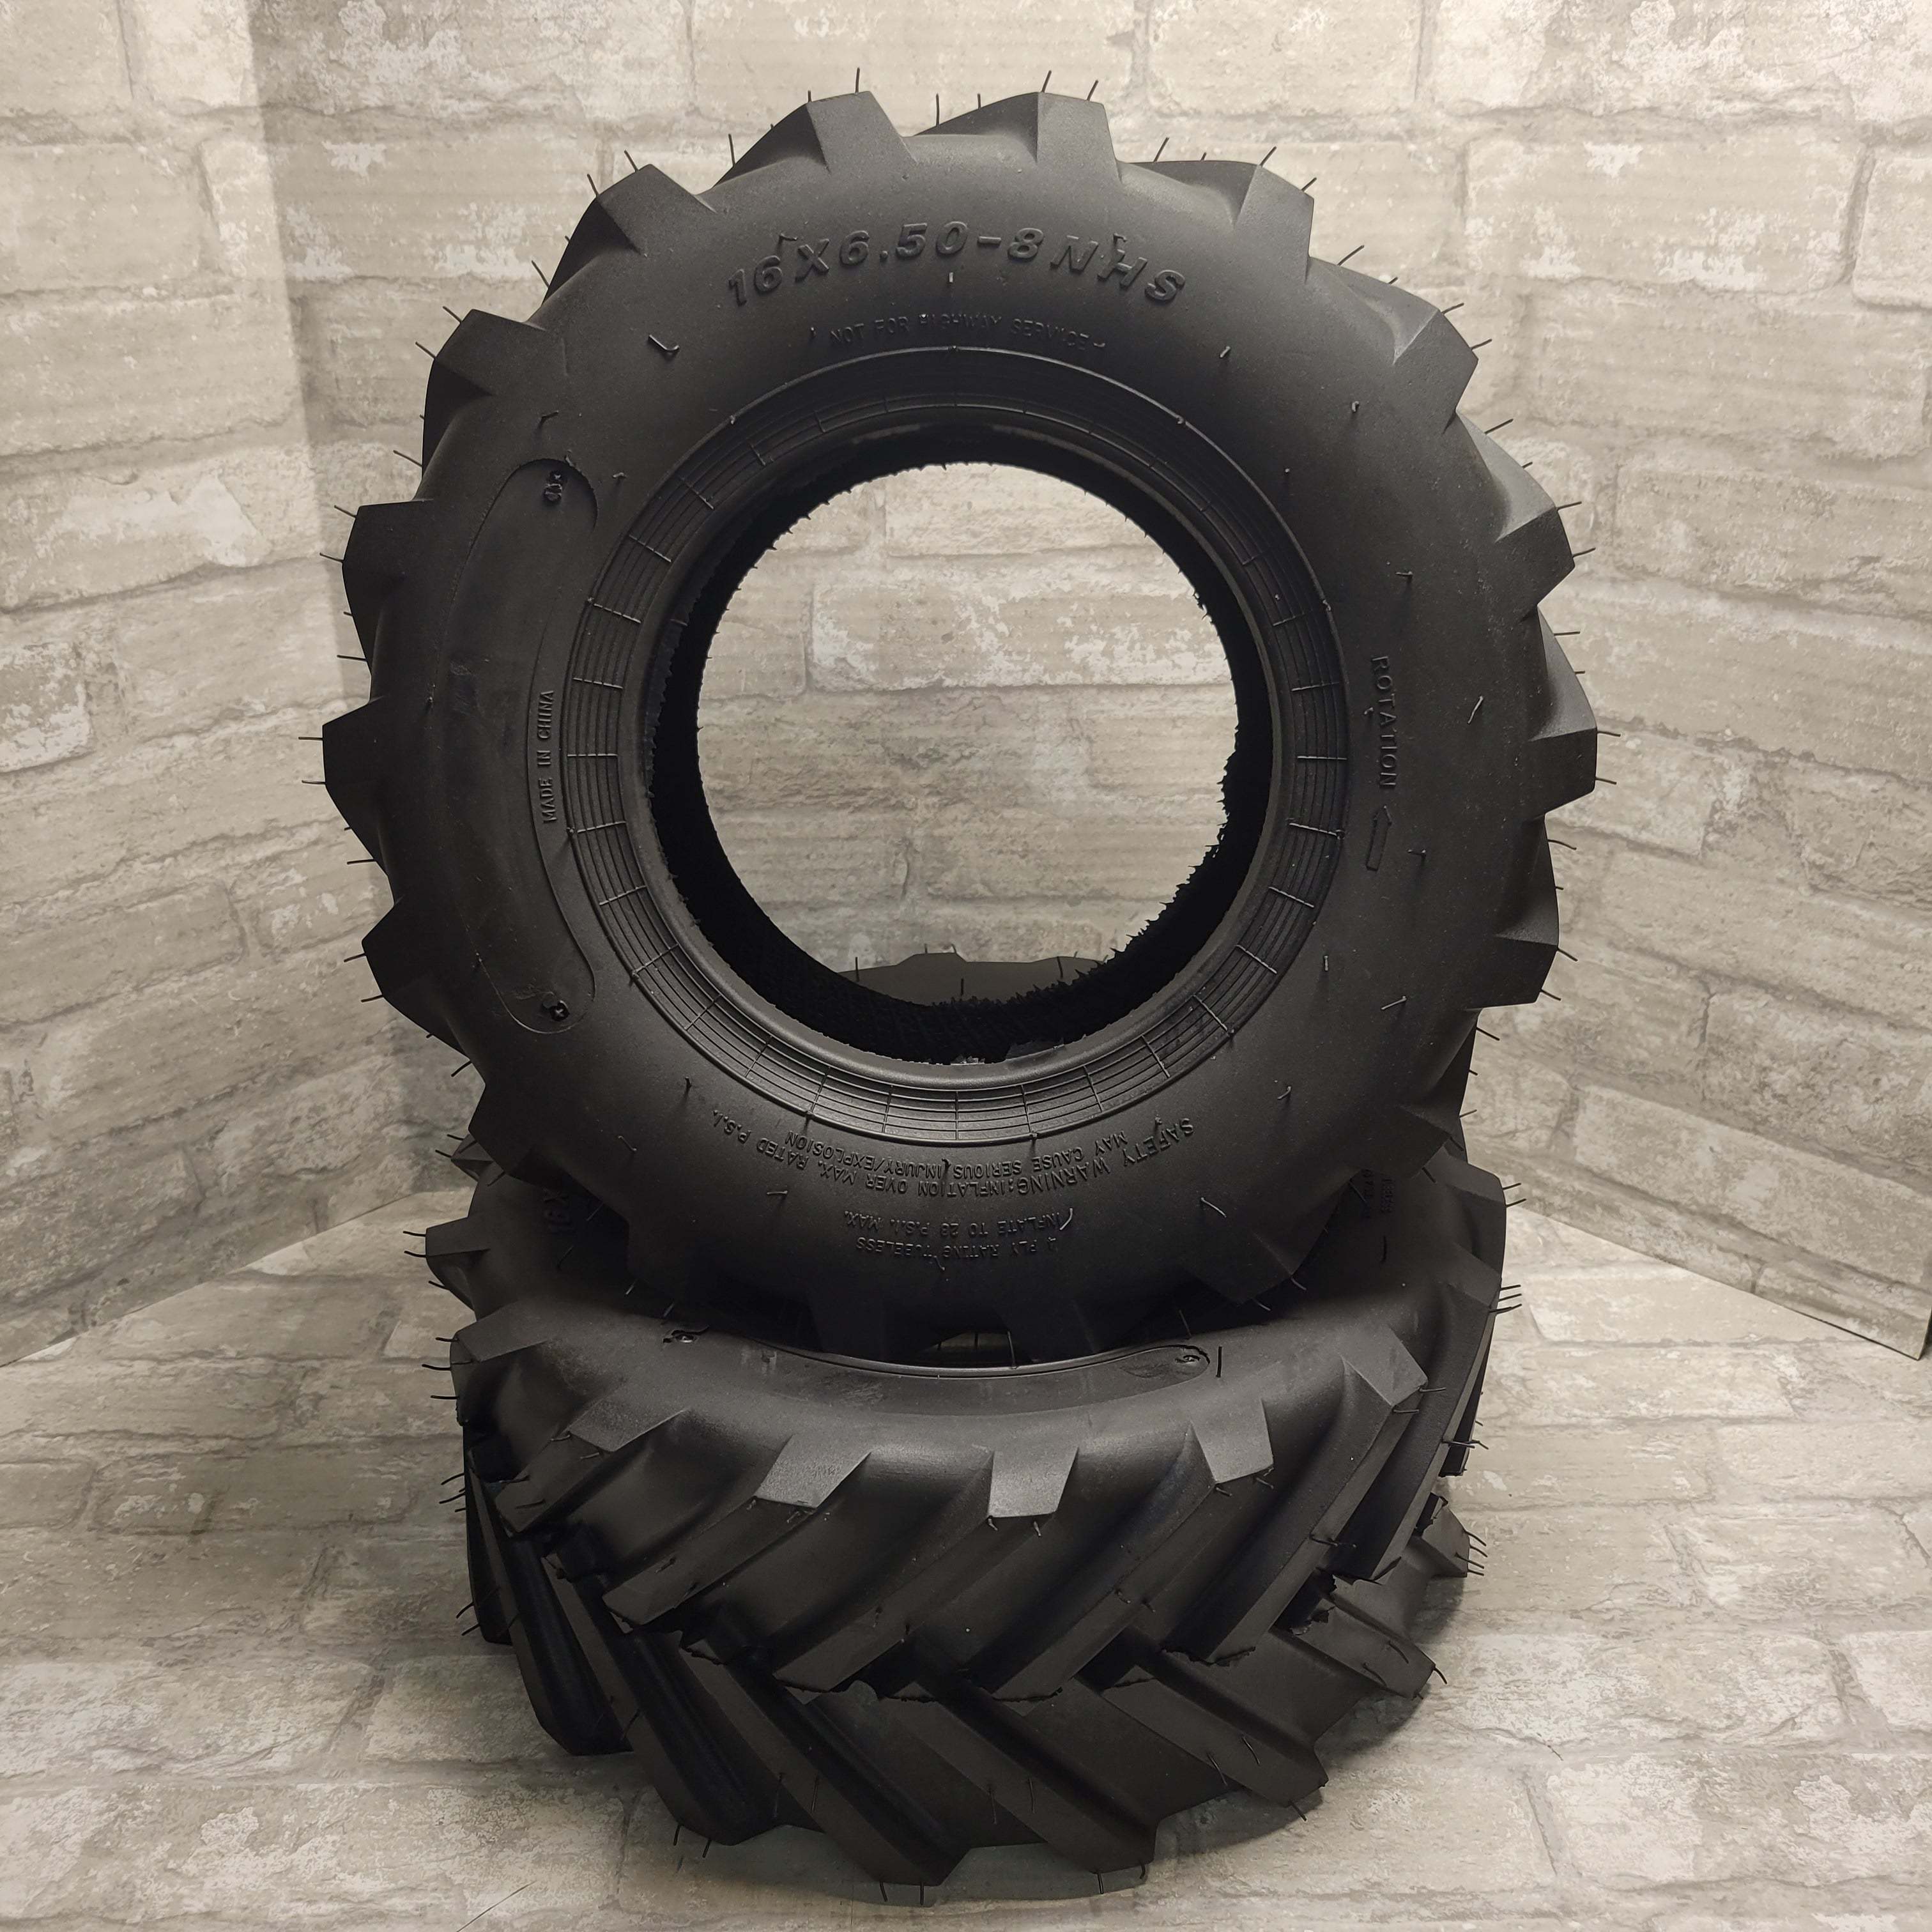 16X6.50-8 Lawn Mower Tires 4Ply Heavy Duty Garden Tractor Tubeless, Set of 2 (8095011930350)